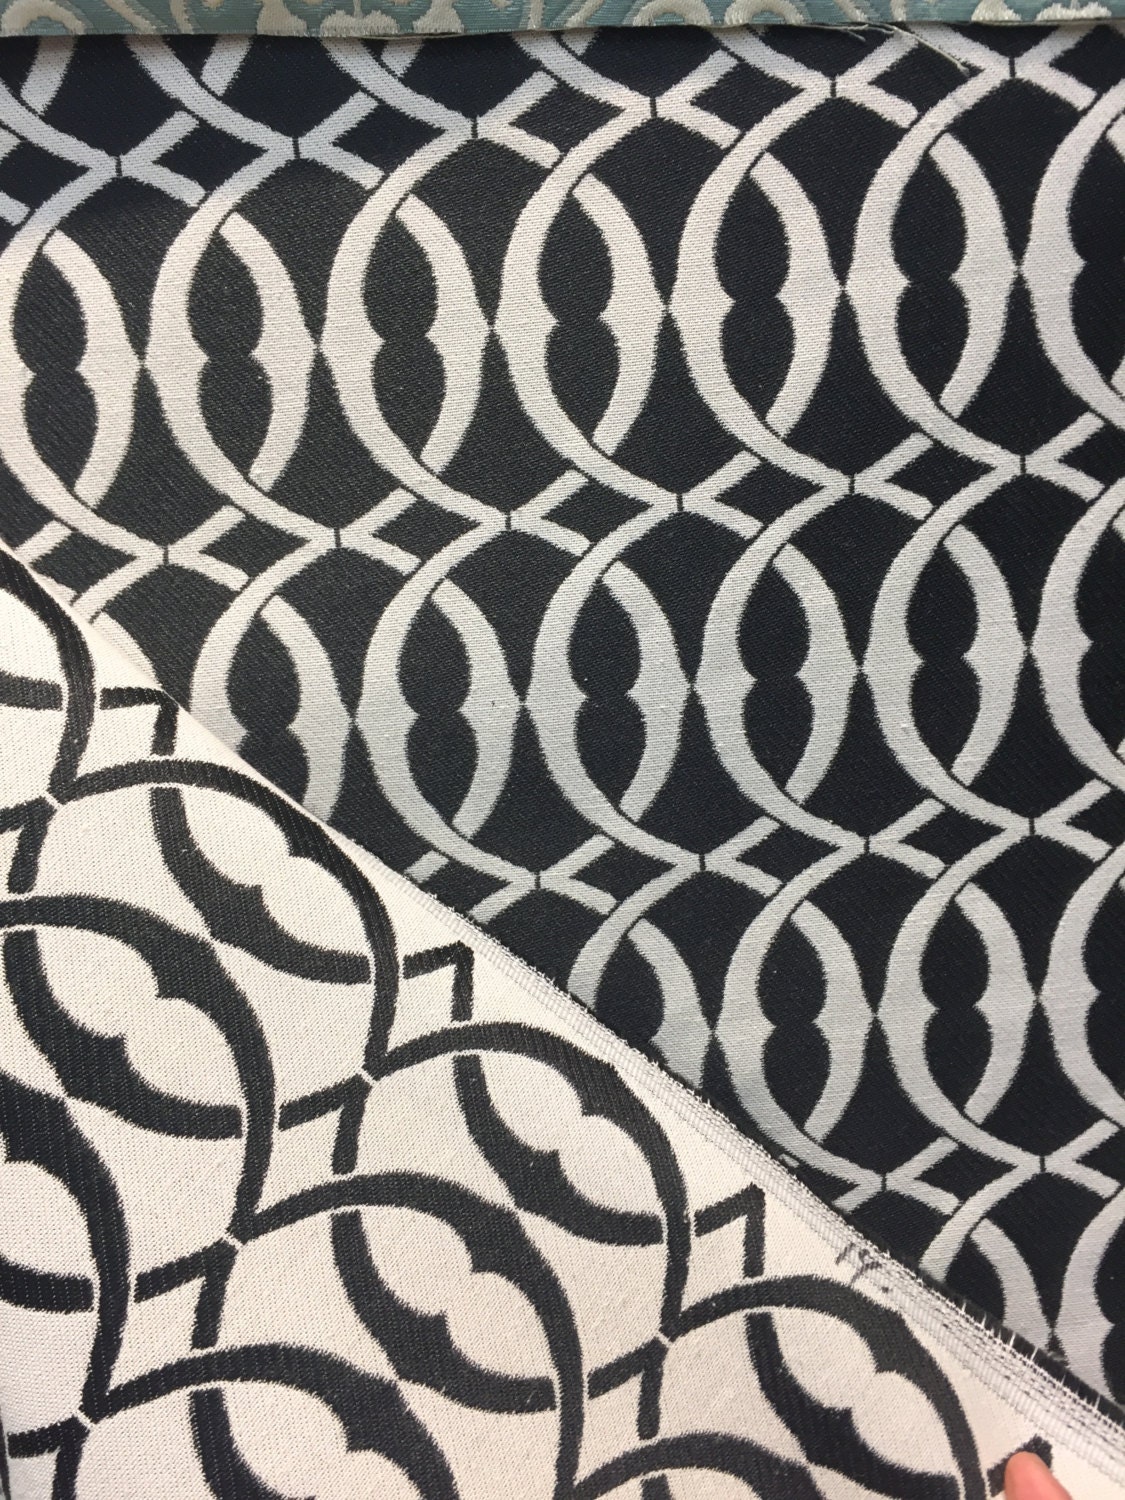 P Kaufmann Line Drawing Stone black White Woven Fabric By the